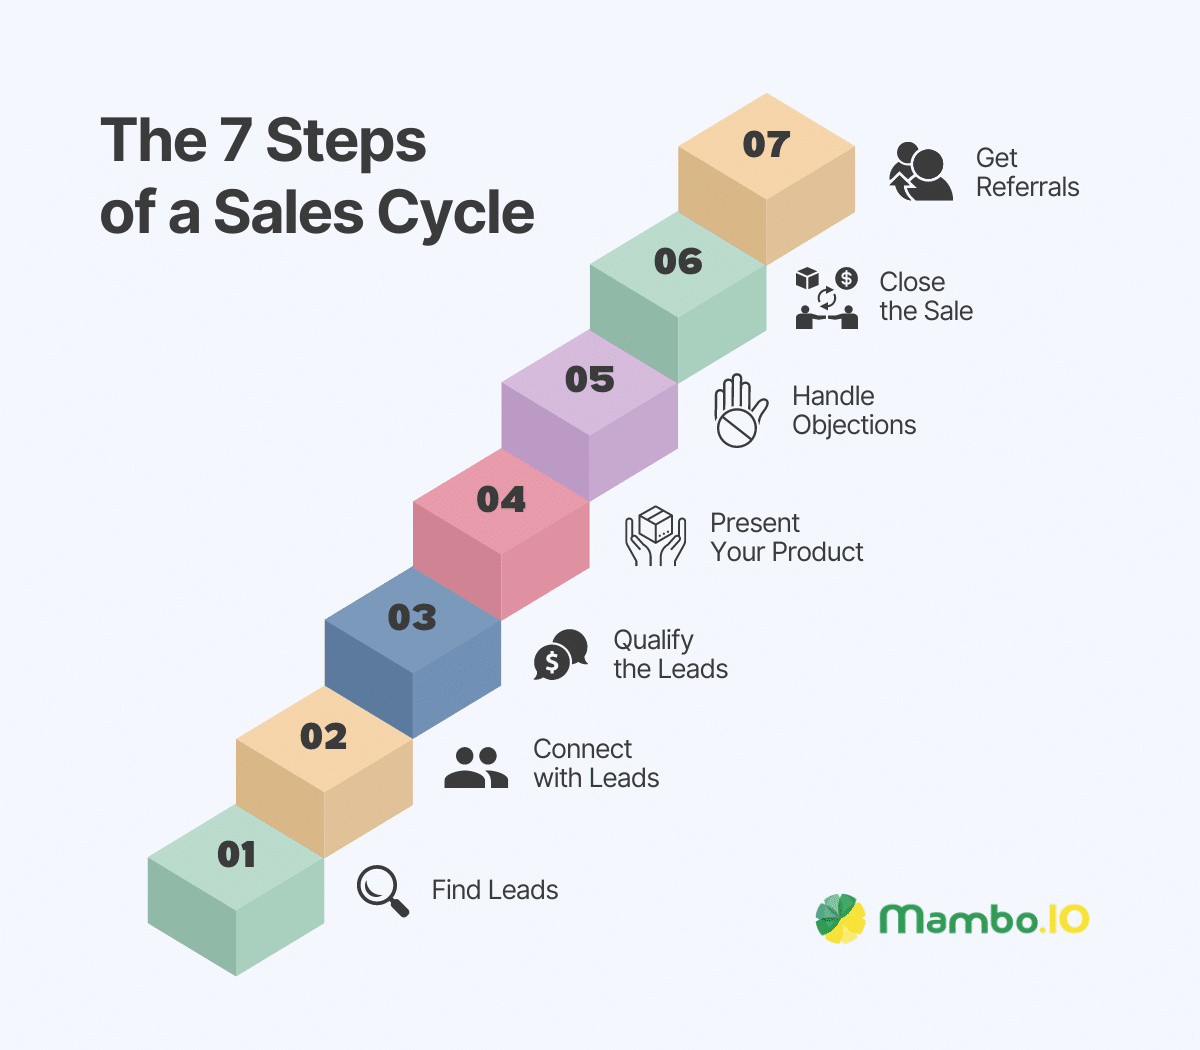 The 7 Steps of a Sales Cycle